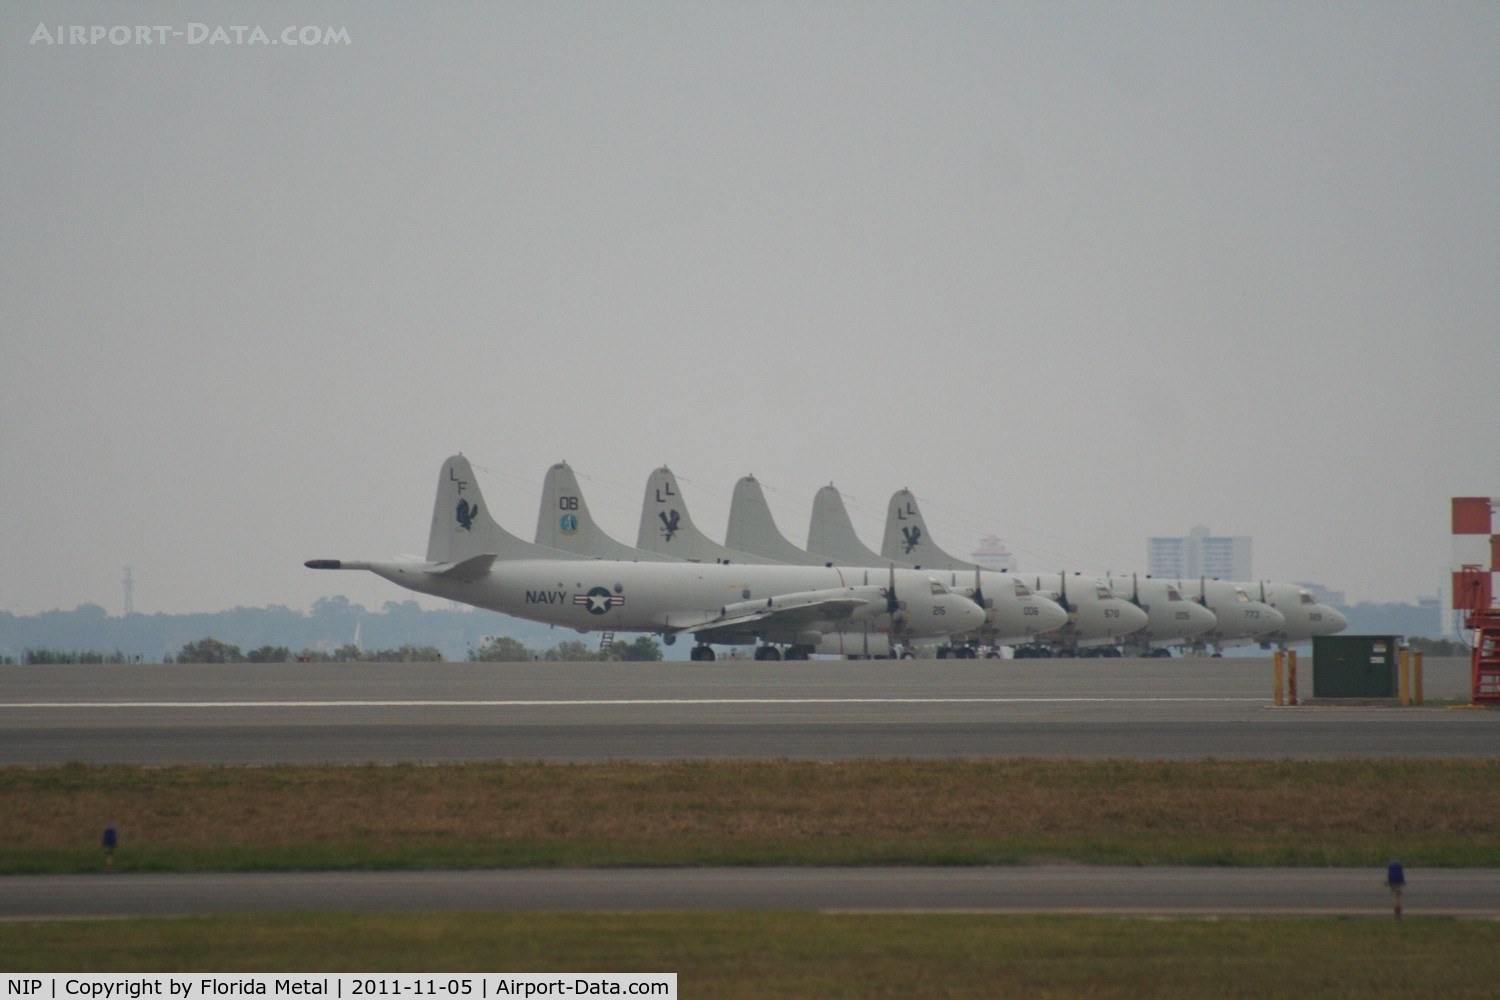 Jacksonville Nas (towers Fld) Airport (NIP) - P-3s lined up